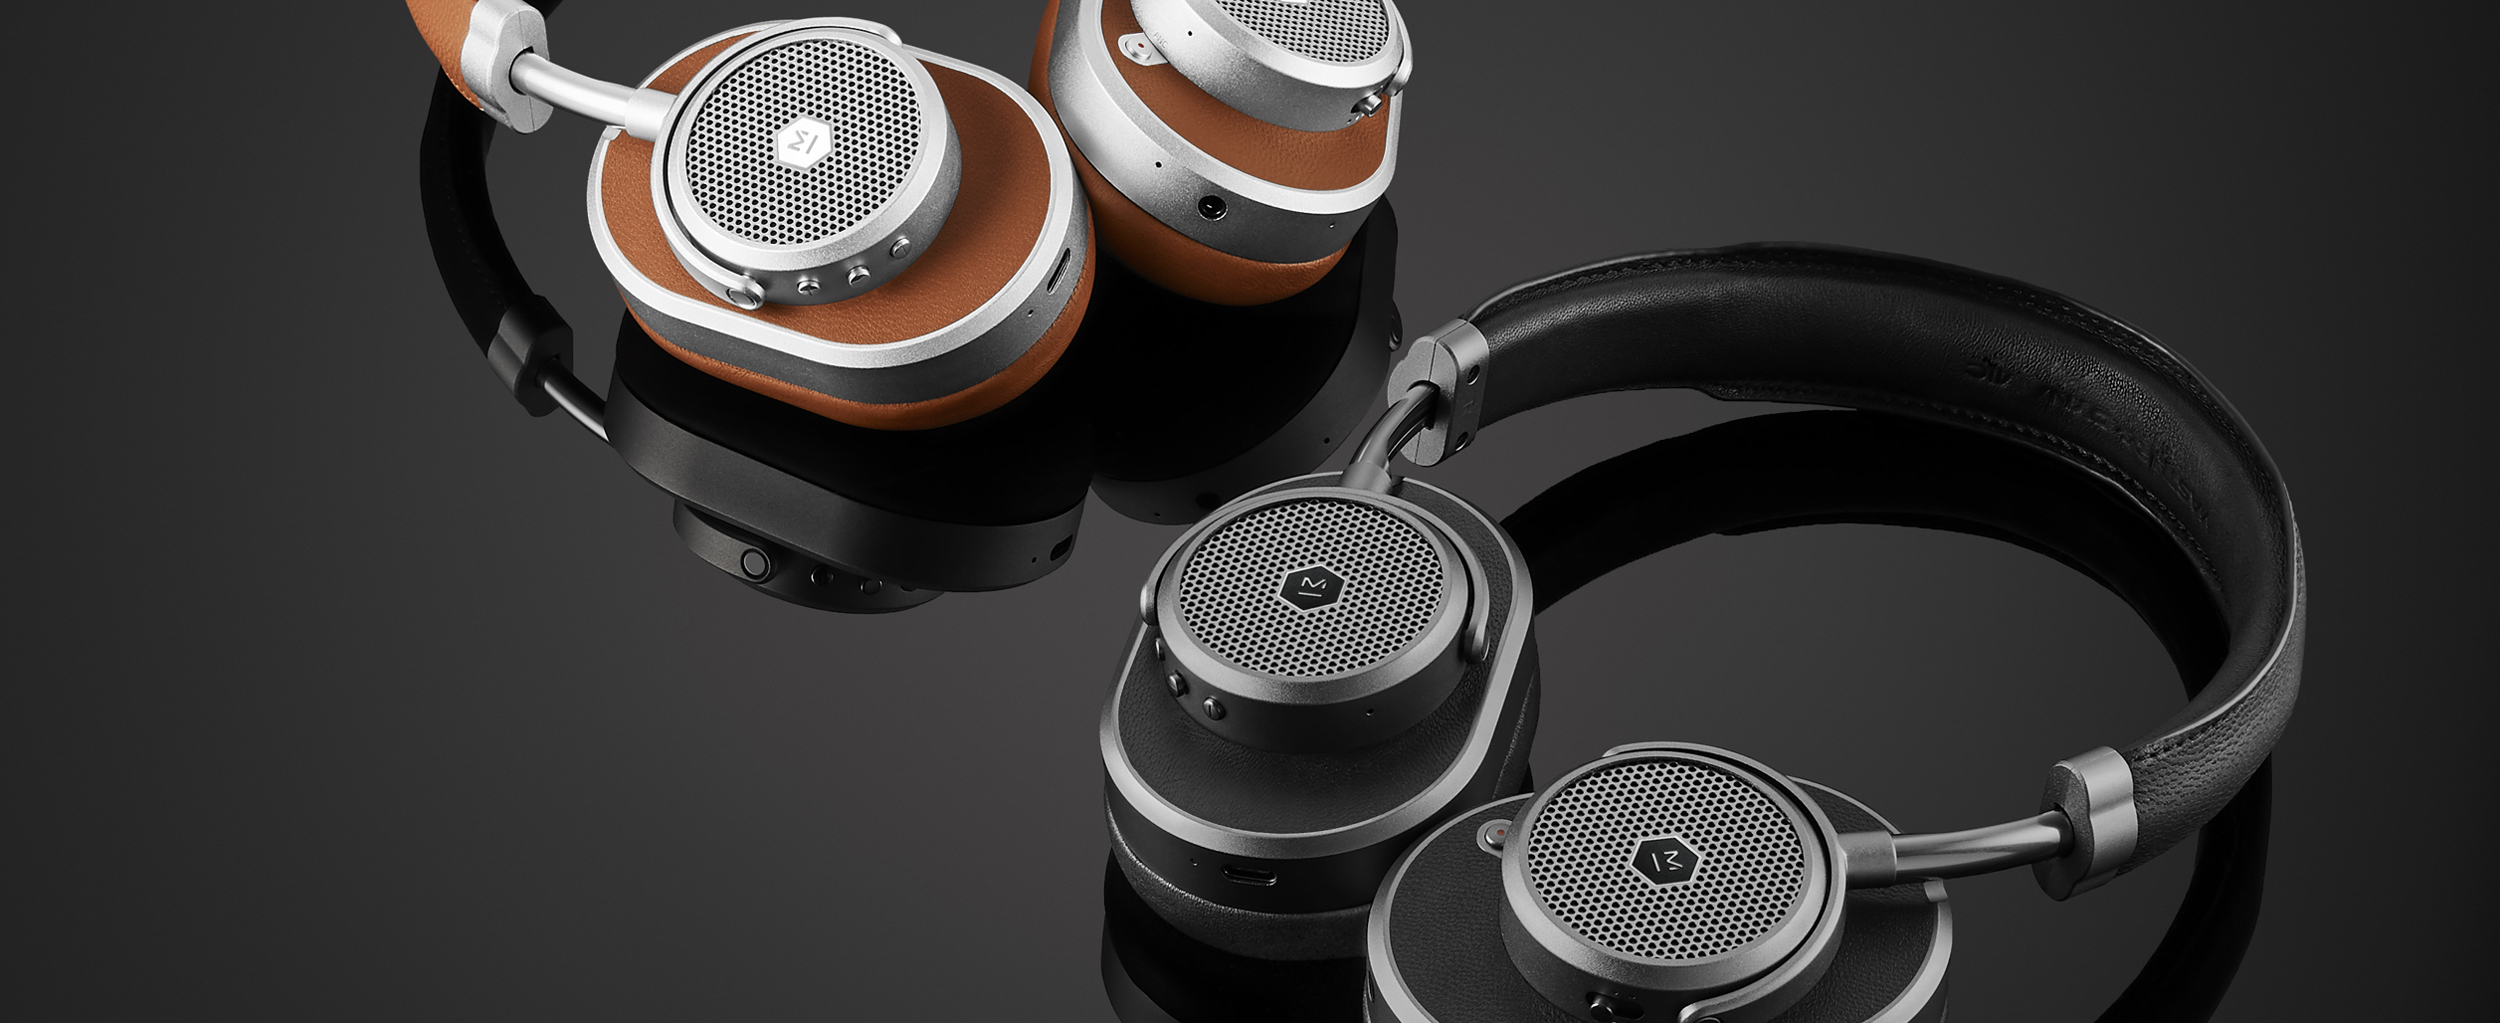 The MW65 Active Noise-Cancelling Wireless Headphones Are A 2019 CES Innovation Awards Honoree